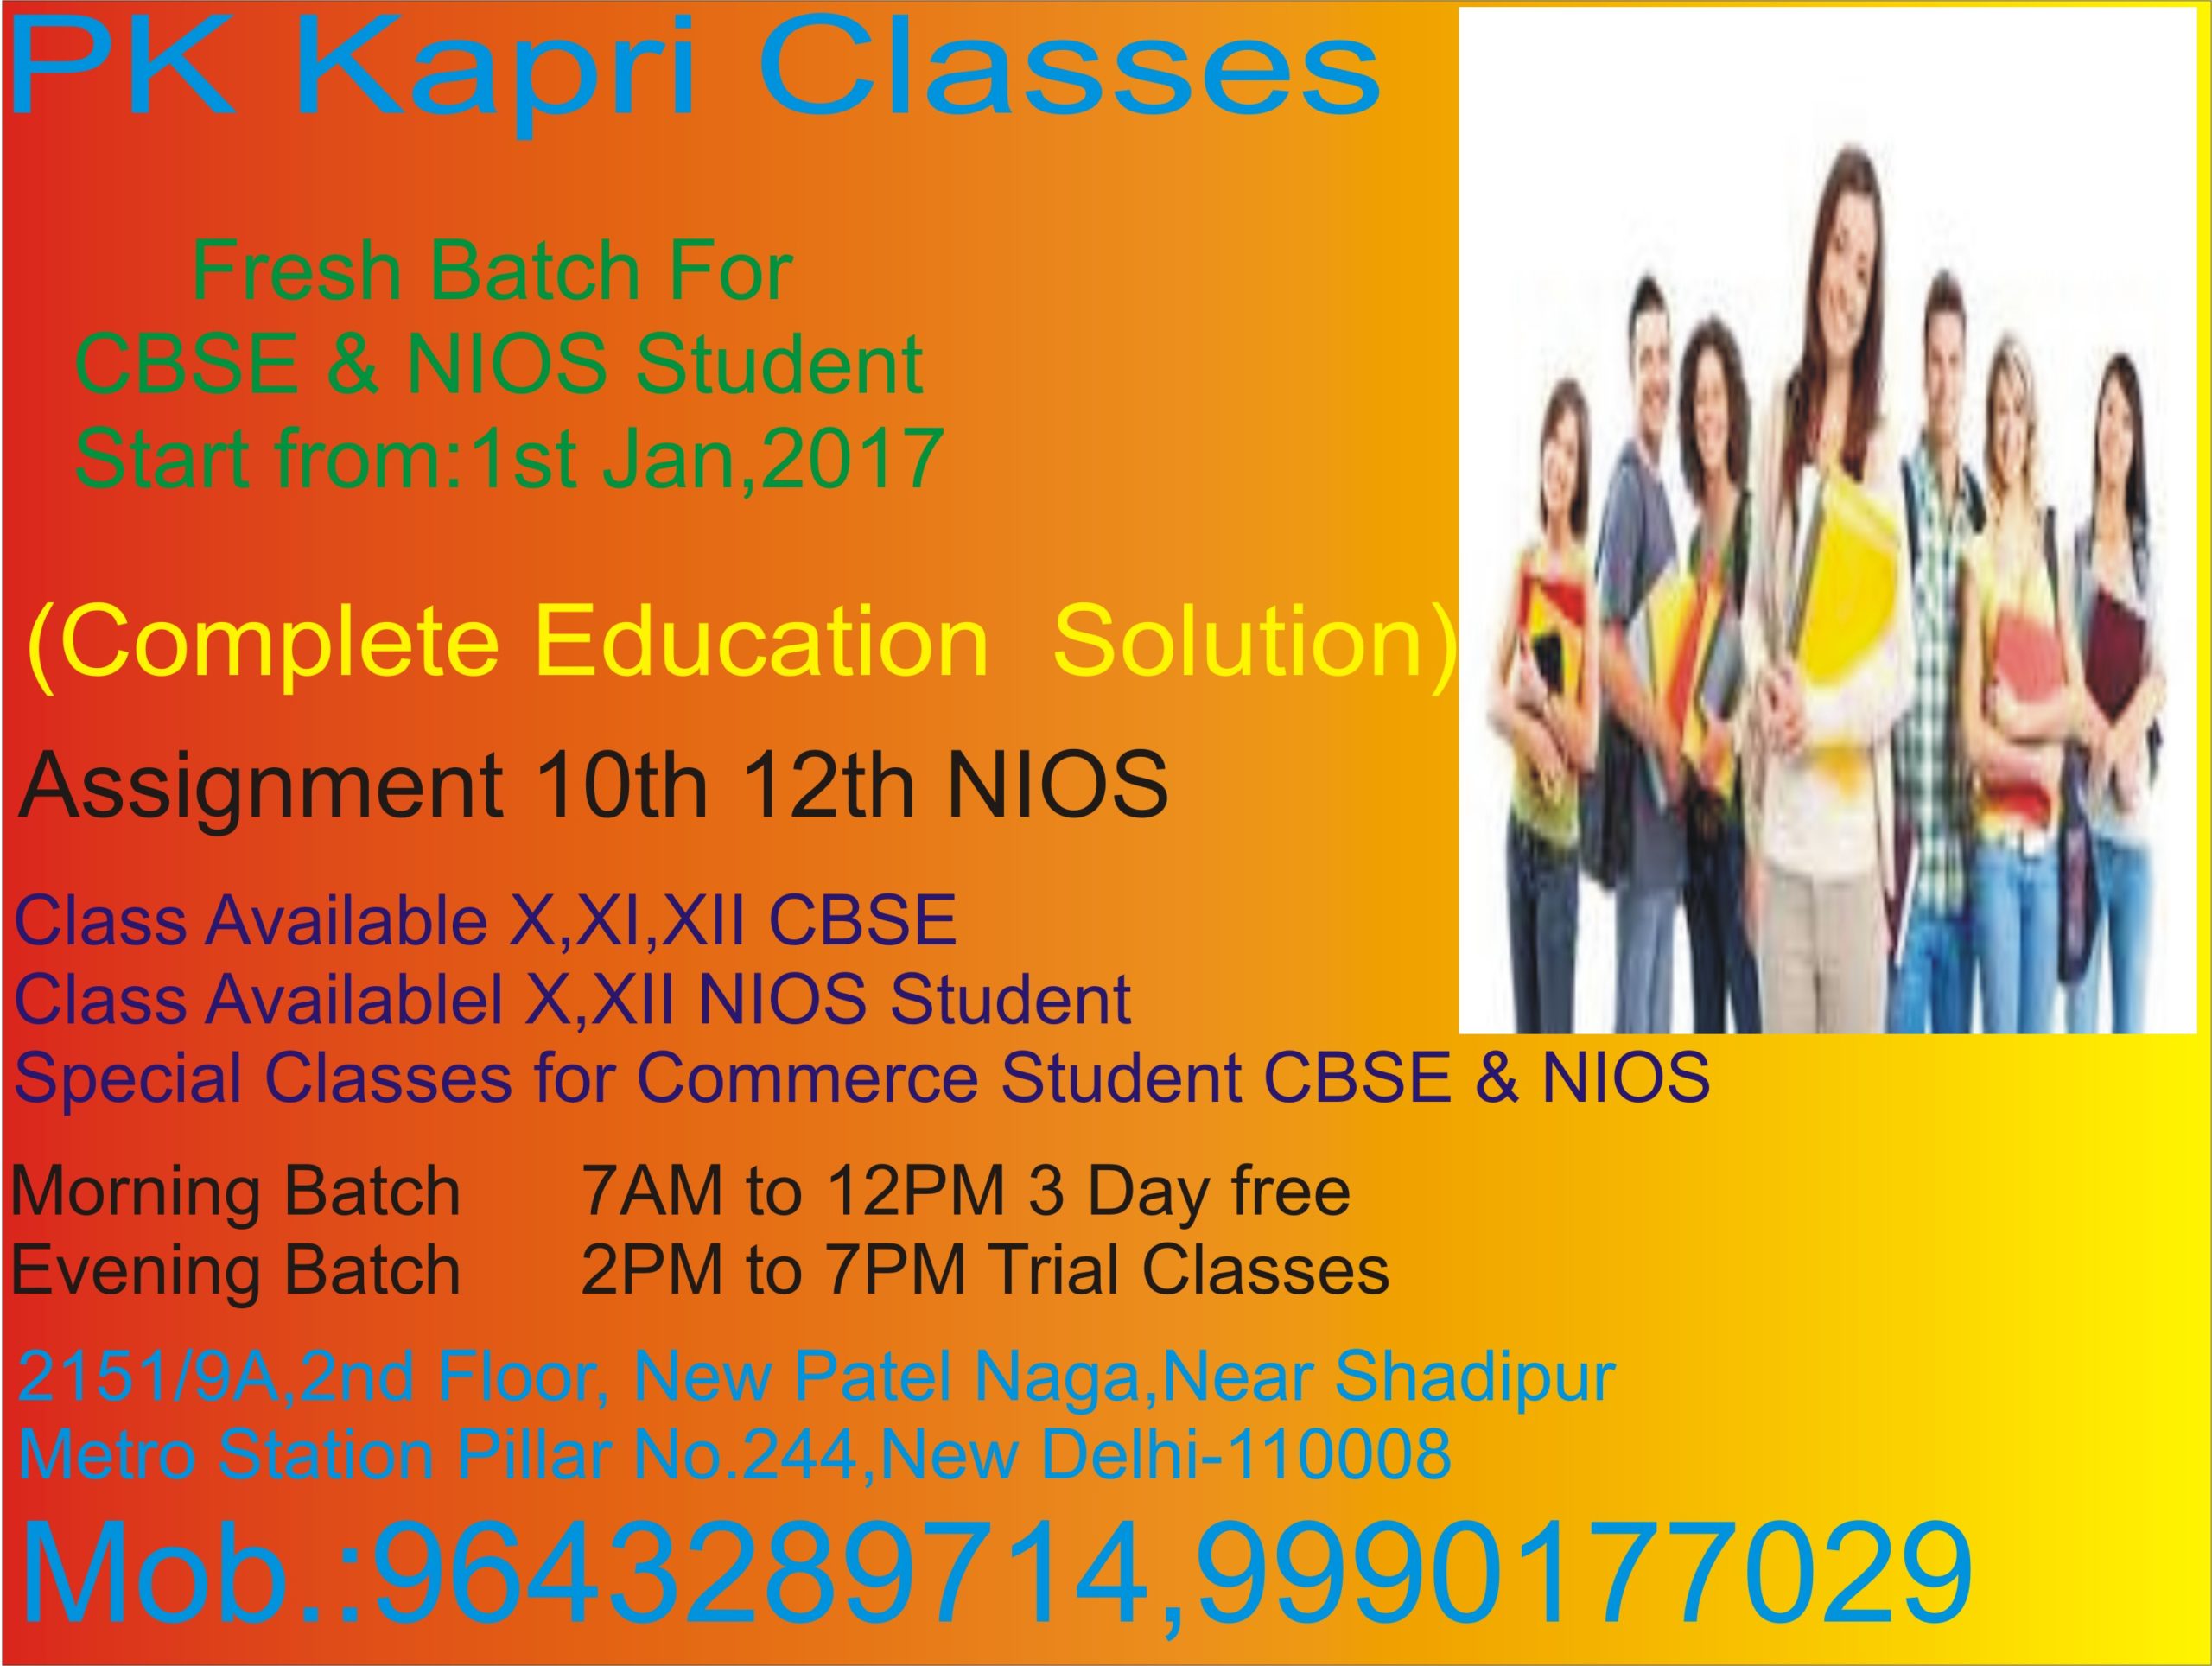 Most of the information about NIOS that you may need during the course of your studies is available on NIOS website or Call Us@9643289714